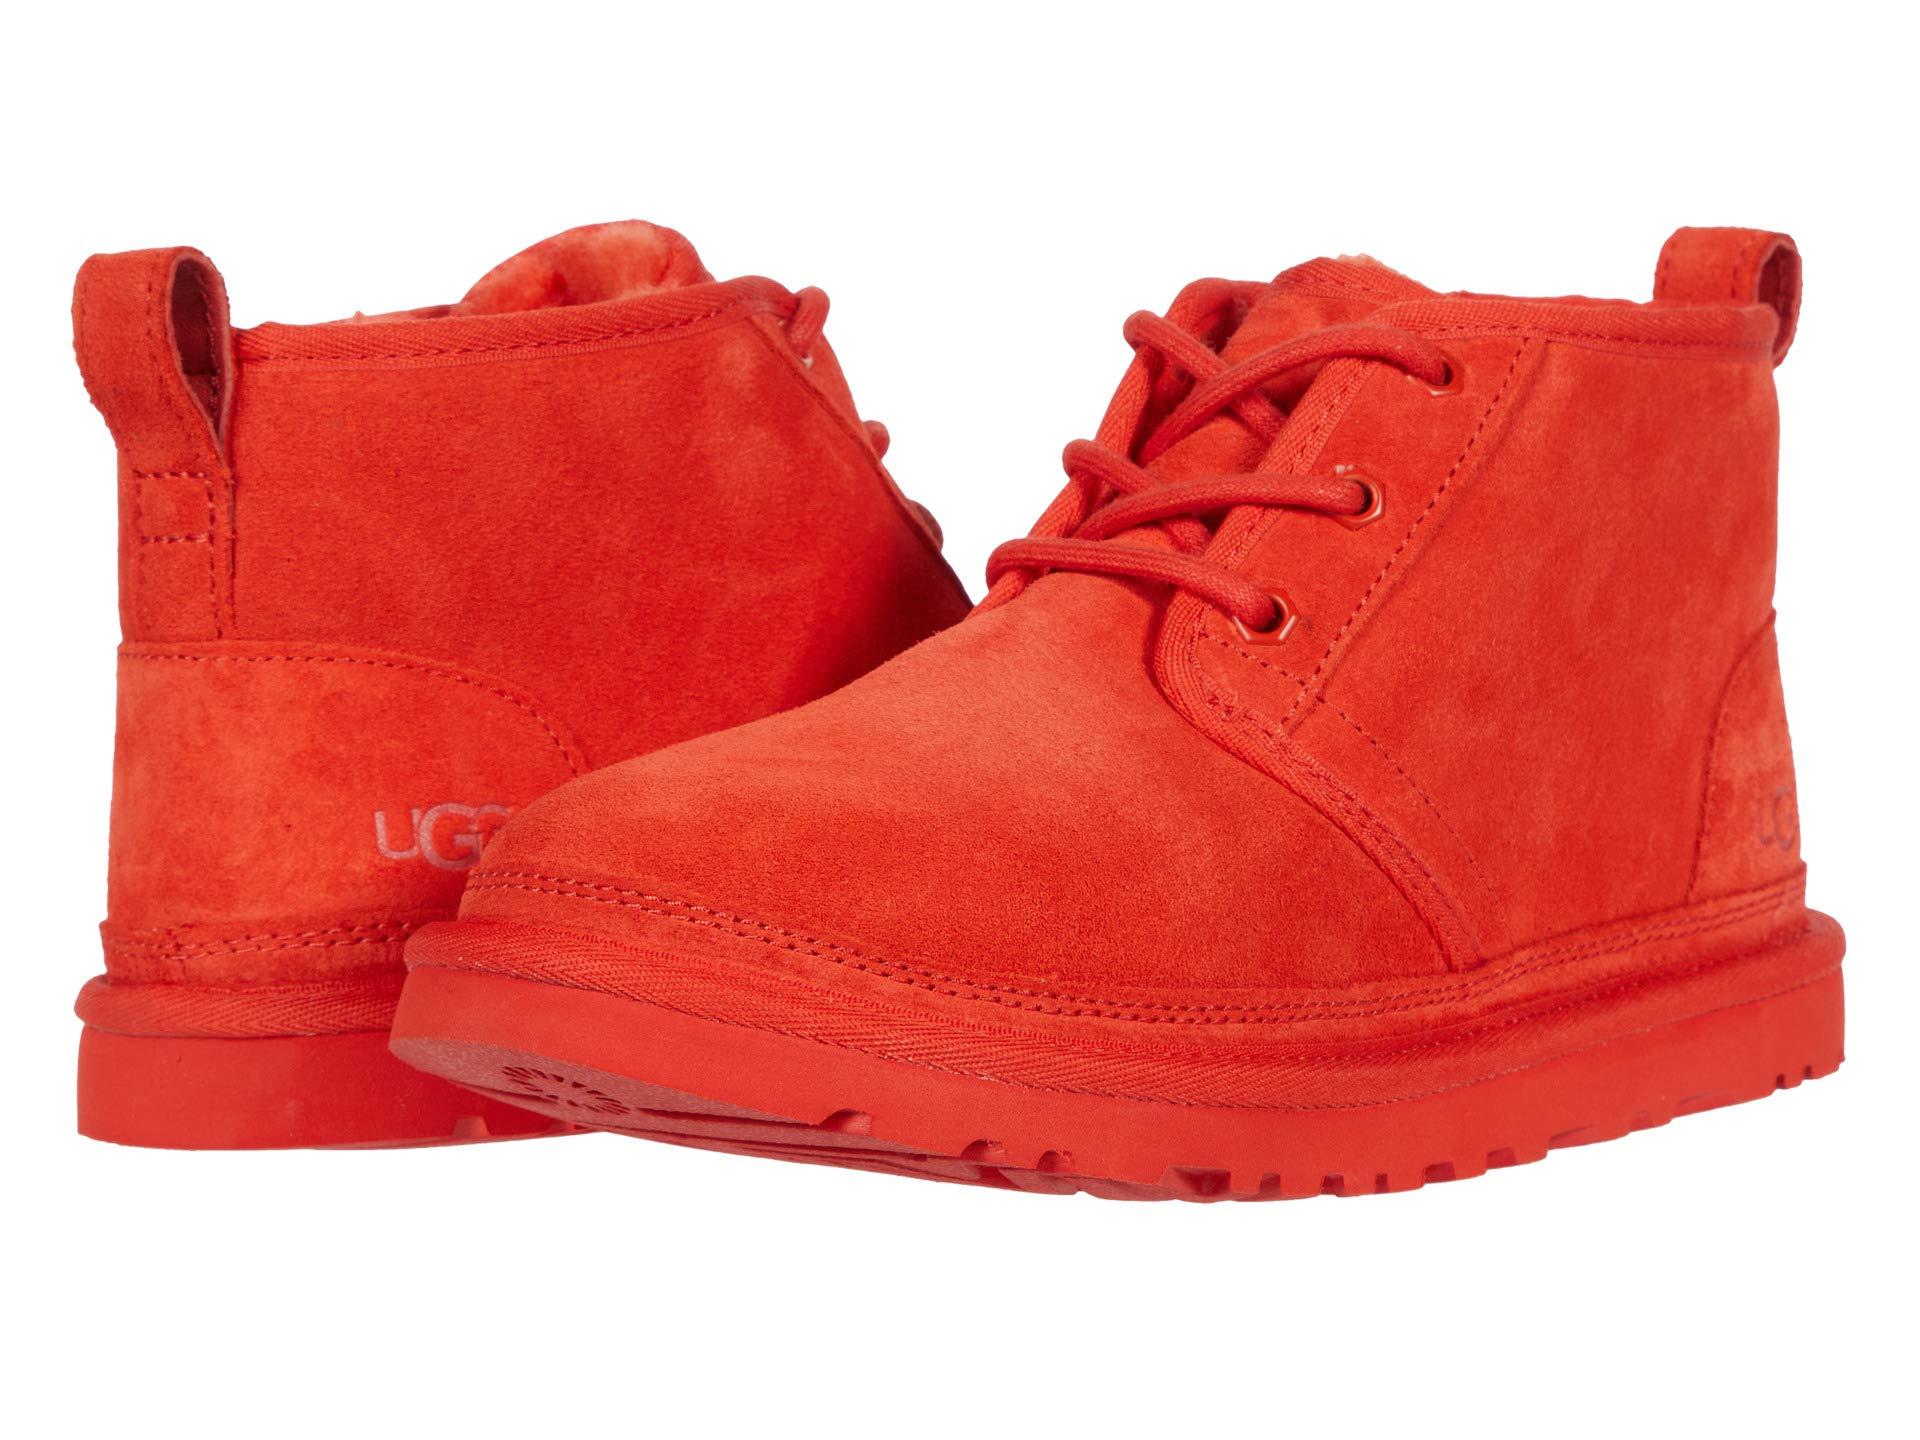 UGG Leather Neumel Lace Up Casual Shoes in Orange - Lyst